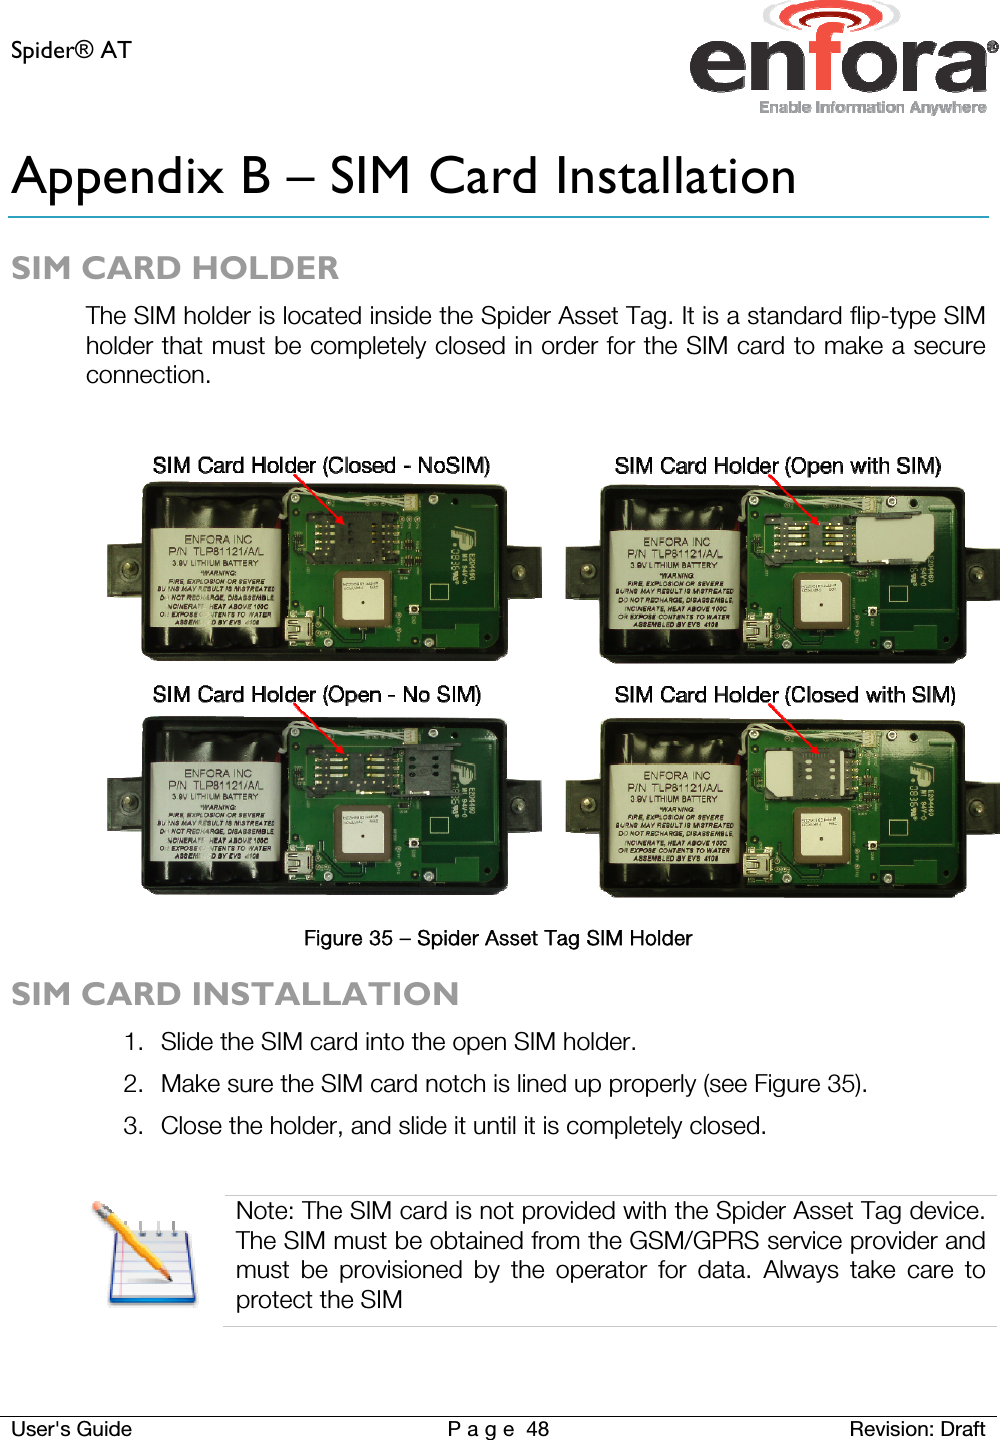 Spider® AT     User&apos;s Guide  P a g e 48 Revision: Draft Appendix B – SIM Card Installation SIM CARD HOLDER The SIM holder is located inside the Spider Asset Tag. It is a standard flip-type SIM holder that must be completely closed in order for the SIM card to make a secure connection.   Figure 35 – Spider Asset Tag SIM Holder SIM CARD INSTALLATION 1. Slide the SIM card into the open SIM holder.  2. Make sure the SIM card notch is lined up properly (see Figure 35). 3. Close the holder, and slide it until it is completely closed.   Note: The SIM card is not provided with the Spider Asset Tag device. The SIM must be obtained from the GSM/GPRS service provider and must be provisioned by the operator for data. Always take care to protect the SIM  